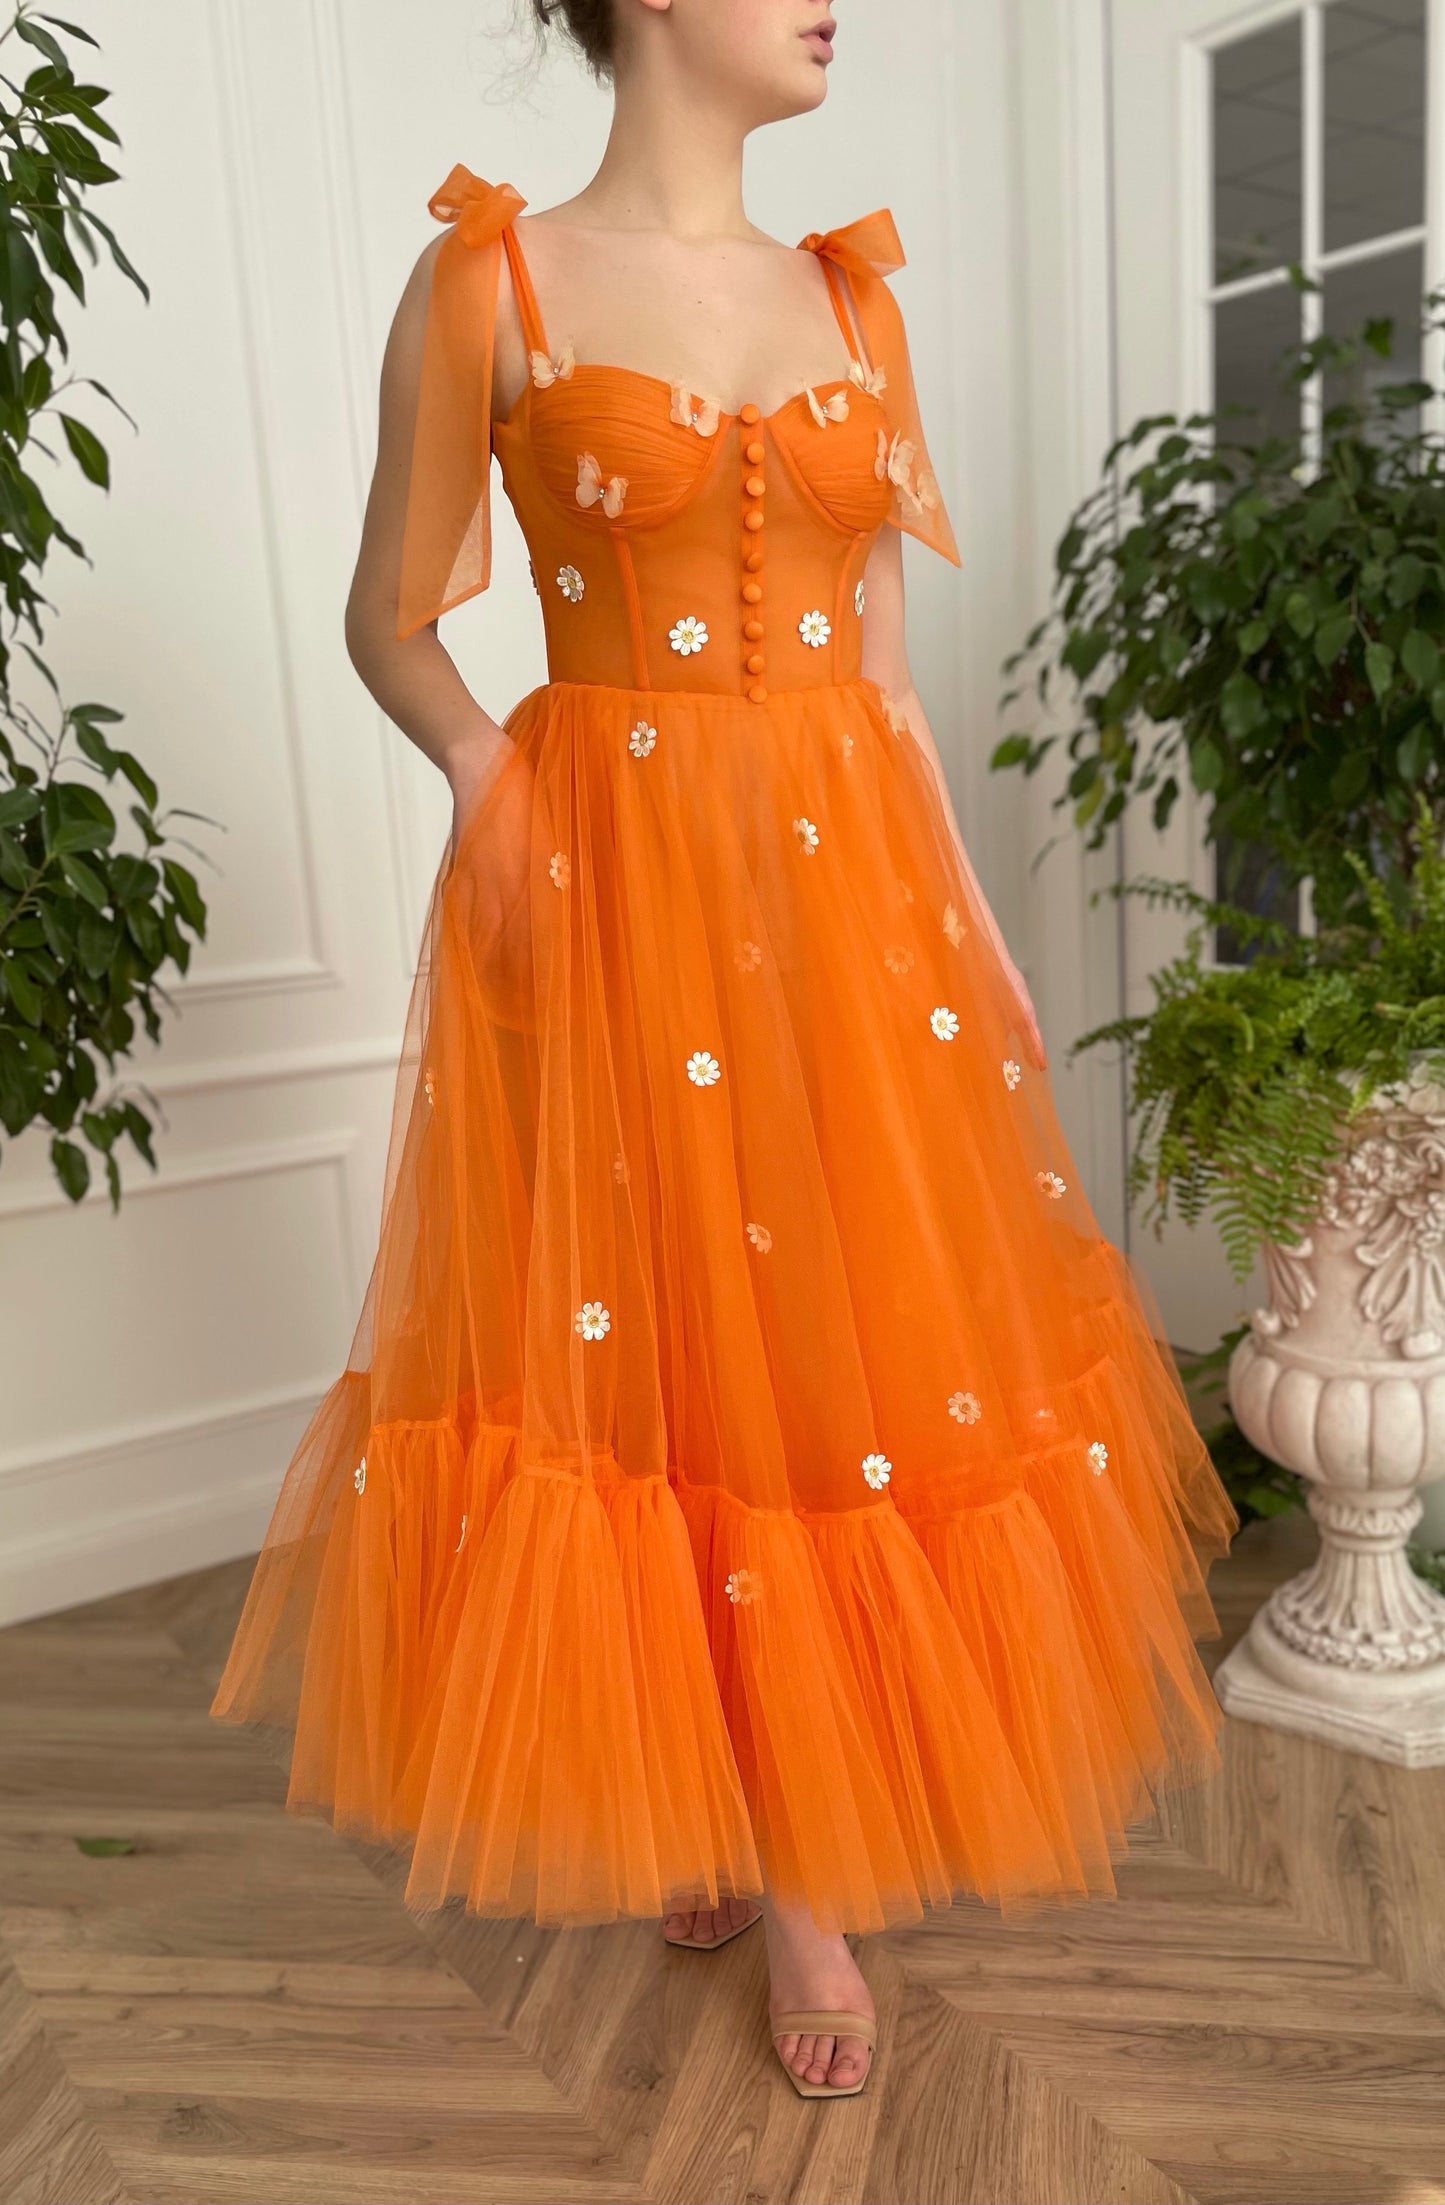 Orange midi dress with bow straps and embroidered daisies and butterflies